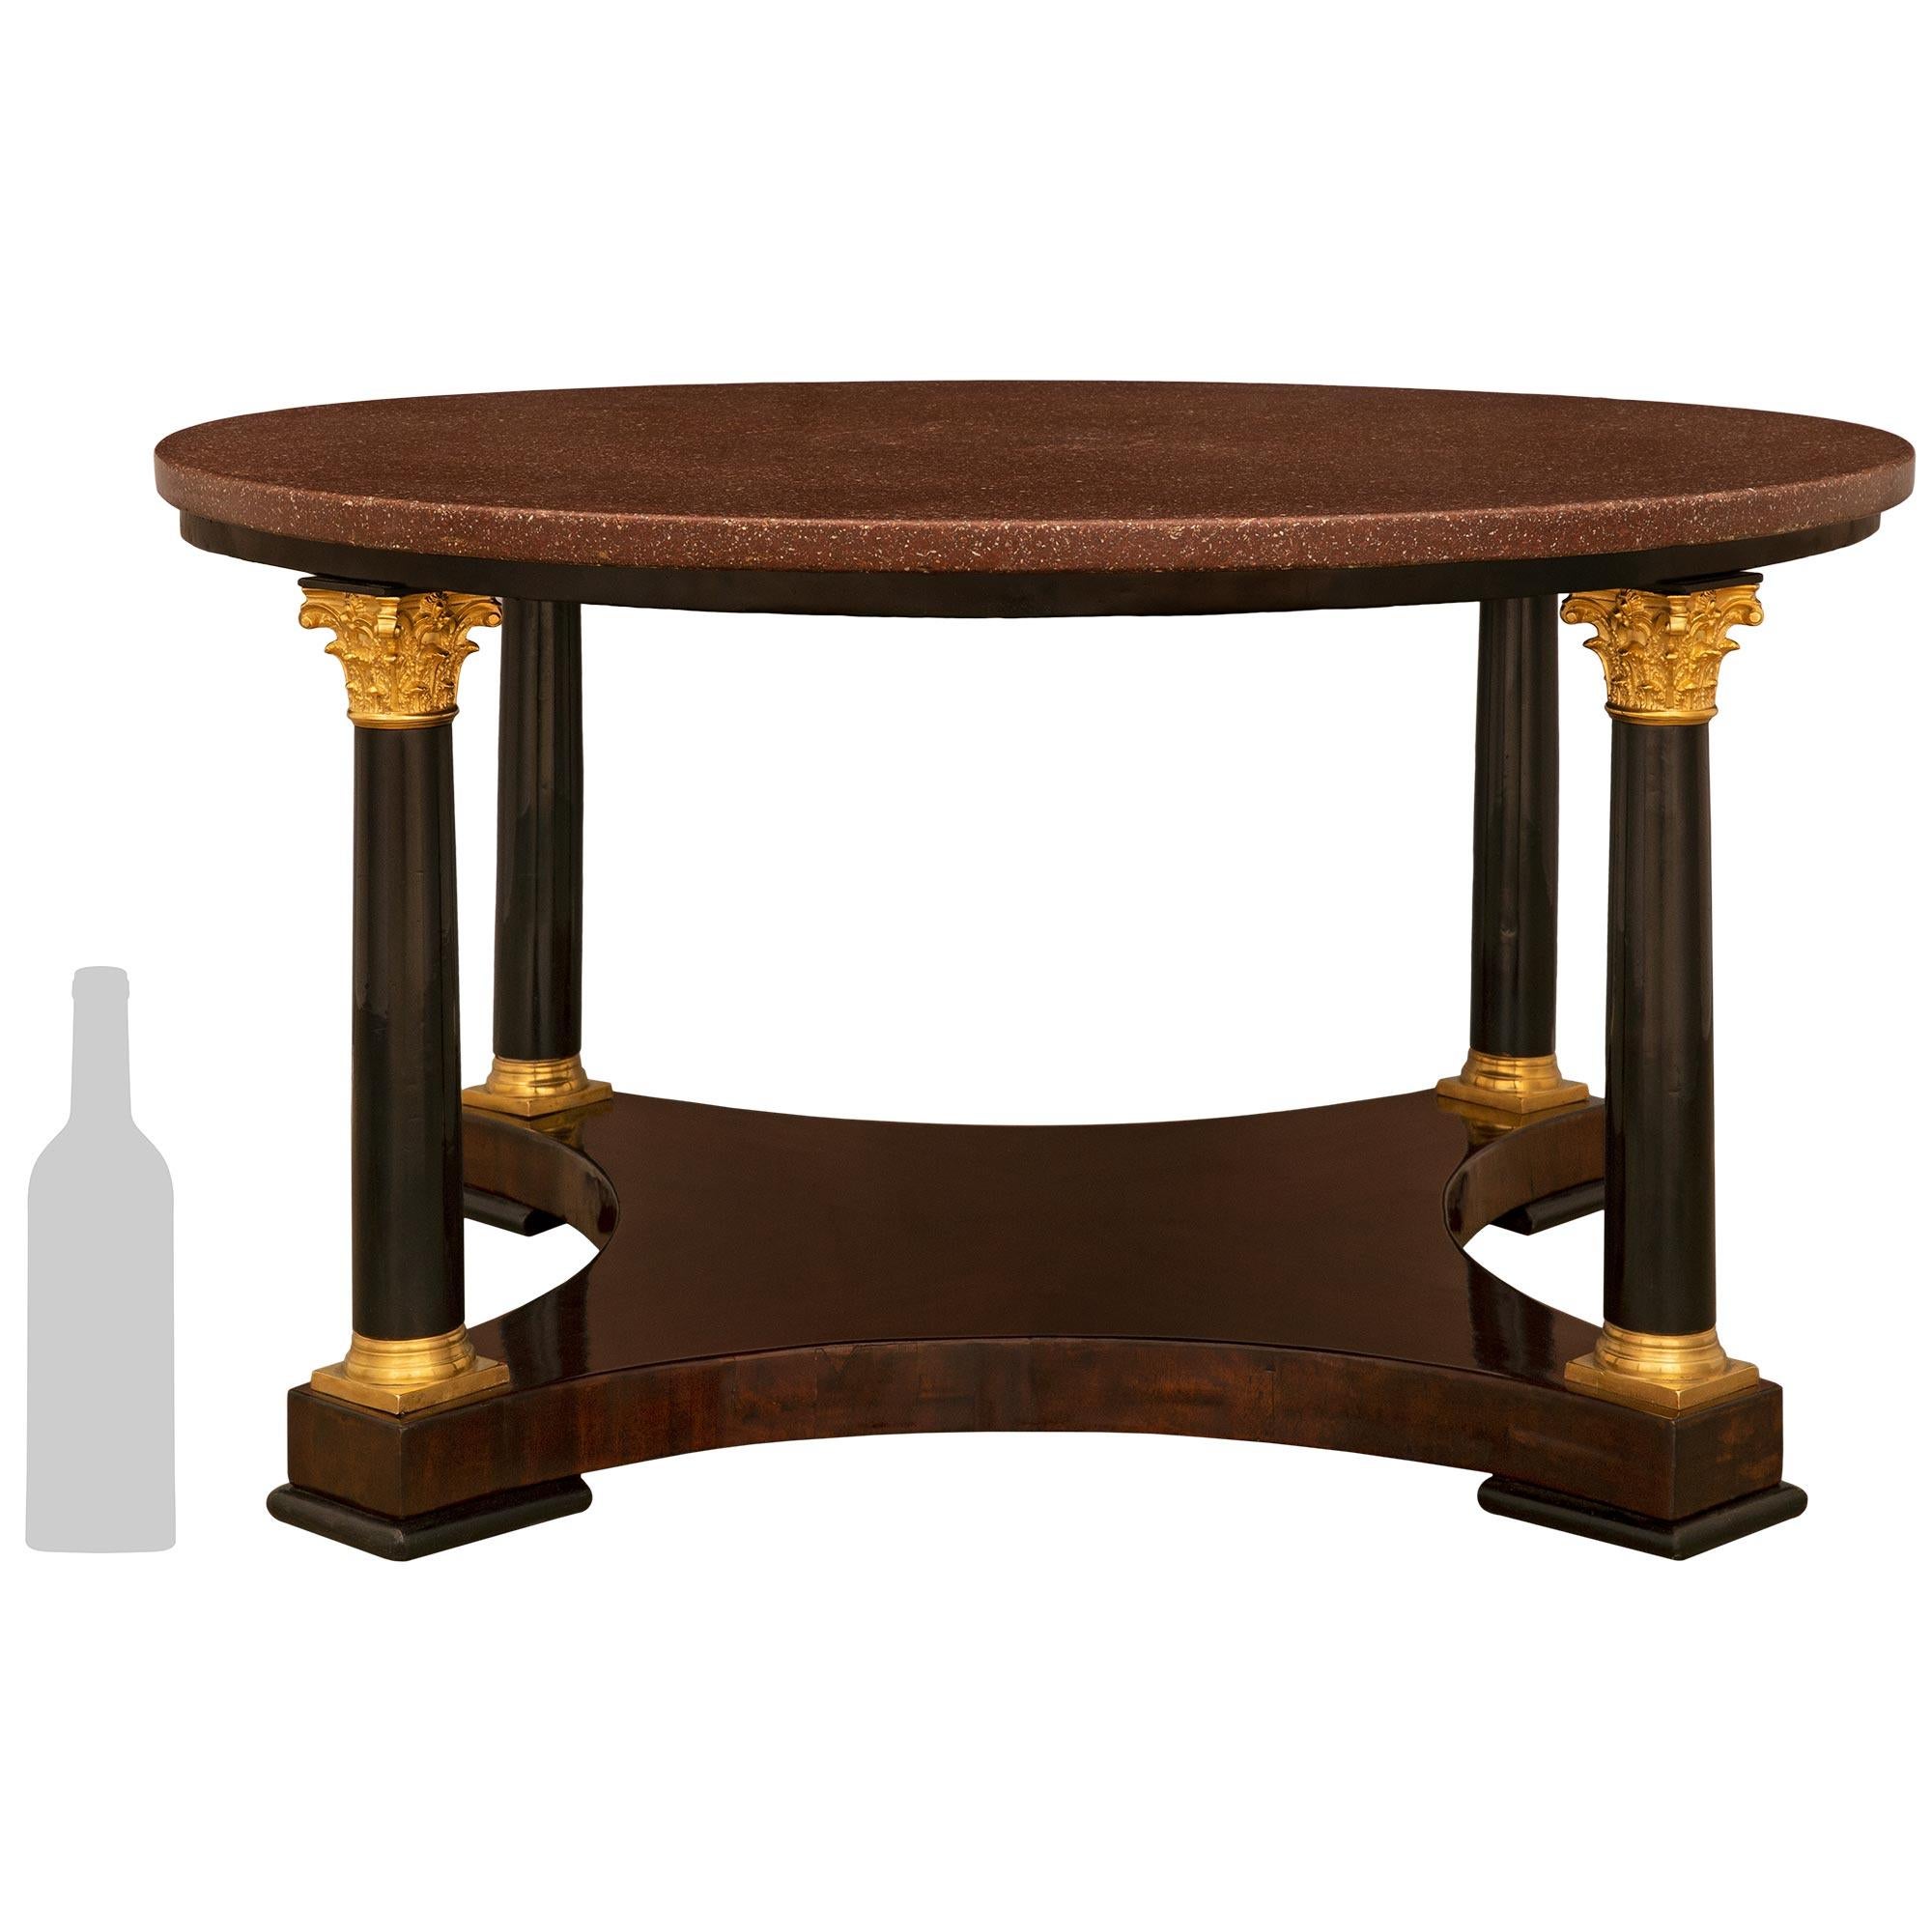 A handsome Continental 19th century neo-classical st. mahogany, ebonized fruitwood, ormolu and porphyry coffee table. The table is raised on four square feet below a mahogany bottom tier with concave sides and four ebonized fruitwood columns with